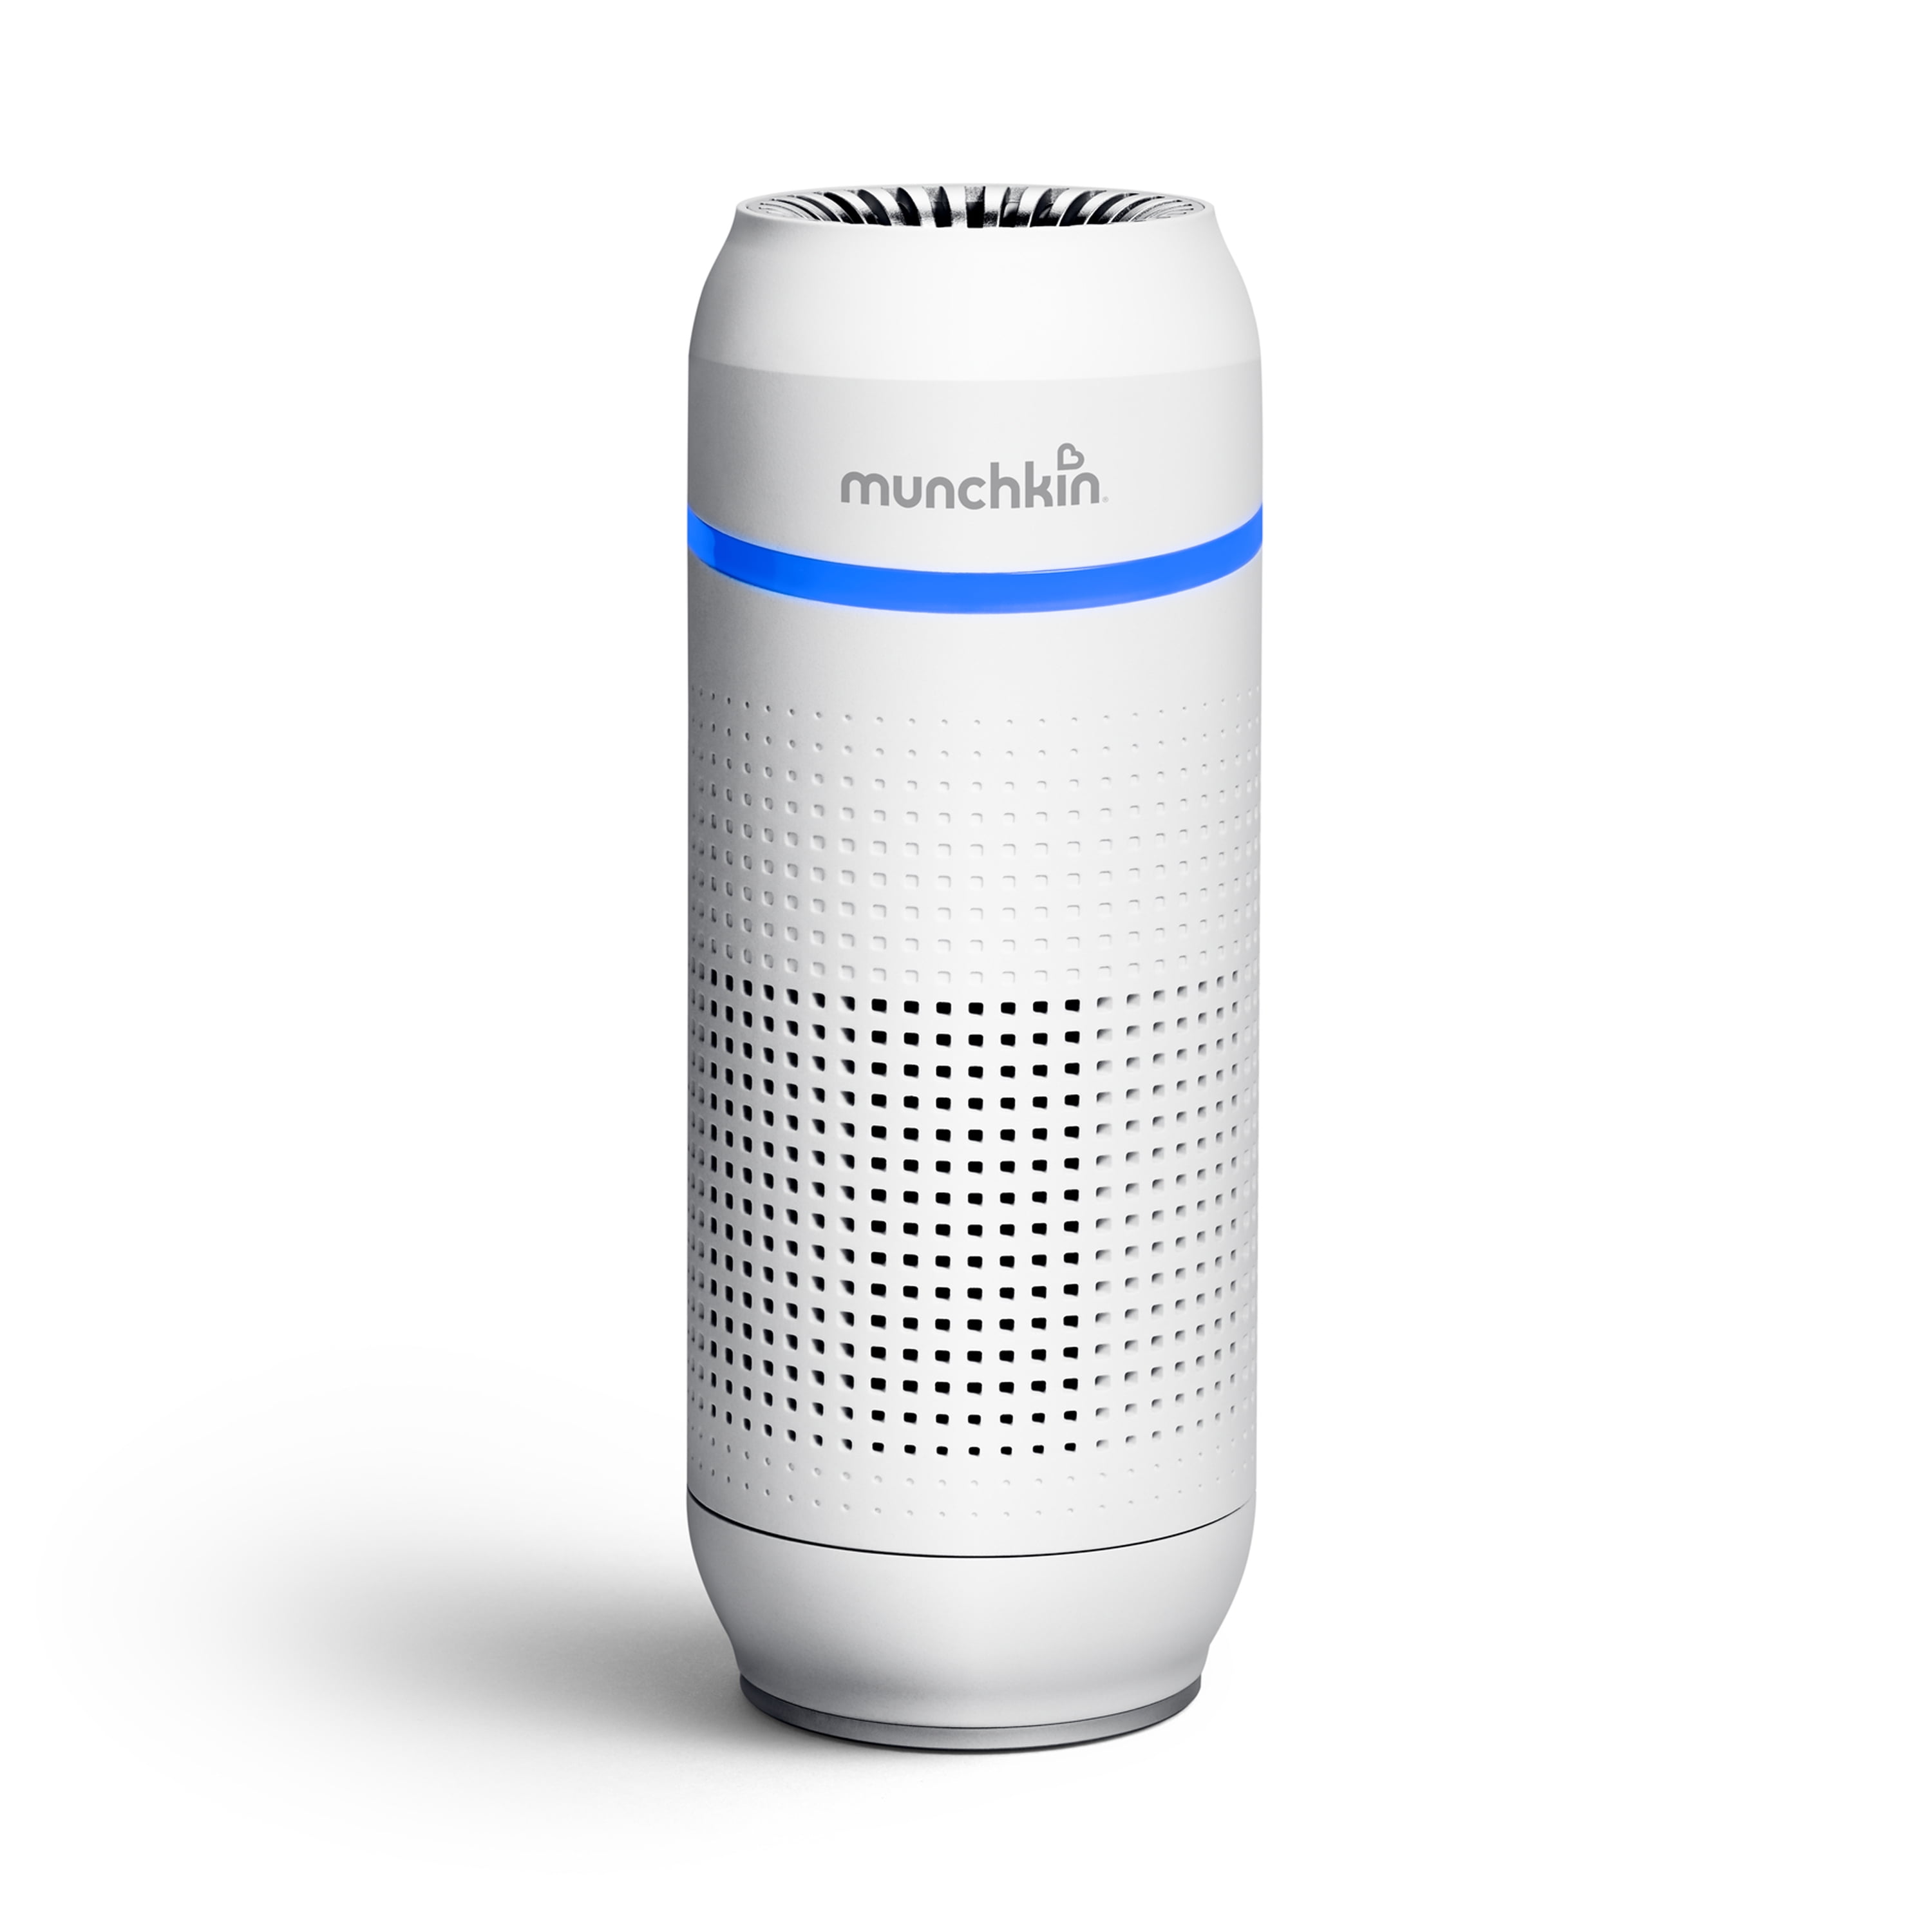 Munchkin Portable Air Purifier 4 Stage True Hepa Filtration System